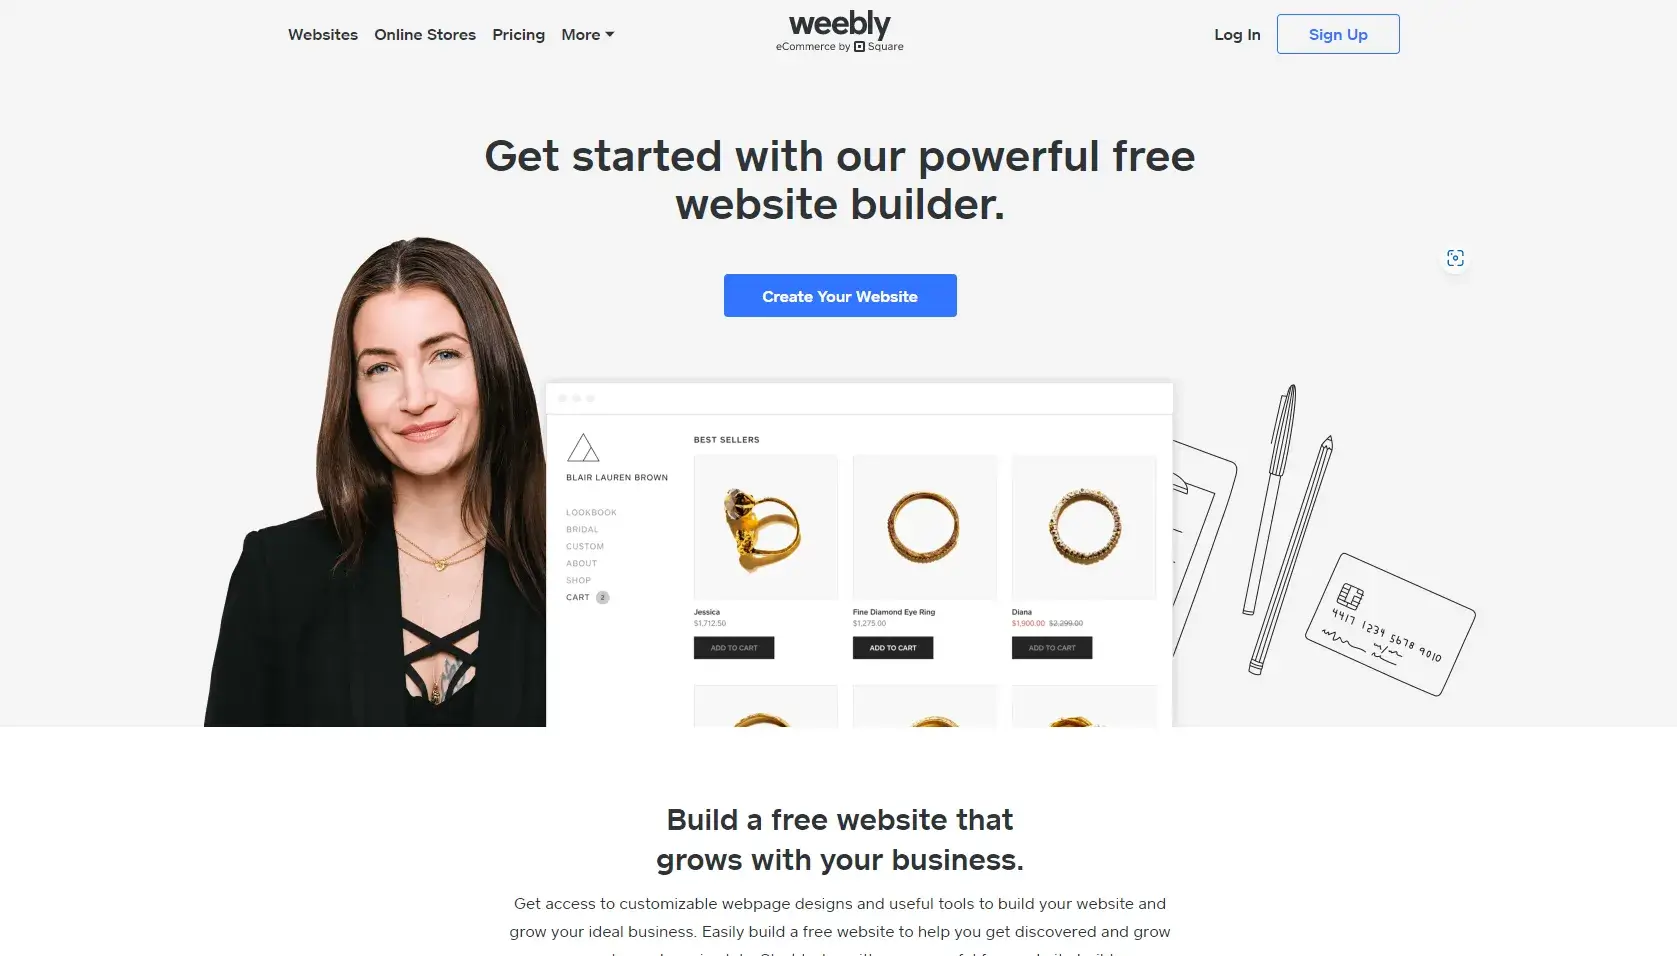 Websites for bloggers : Weebly.com